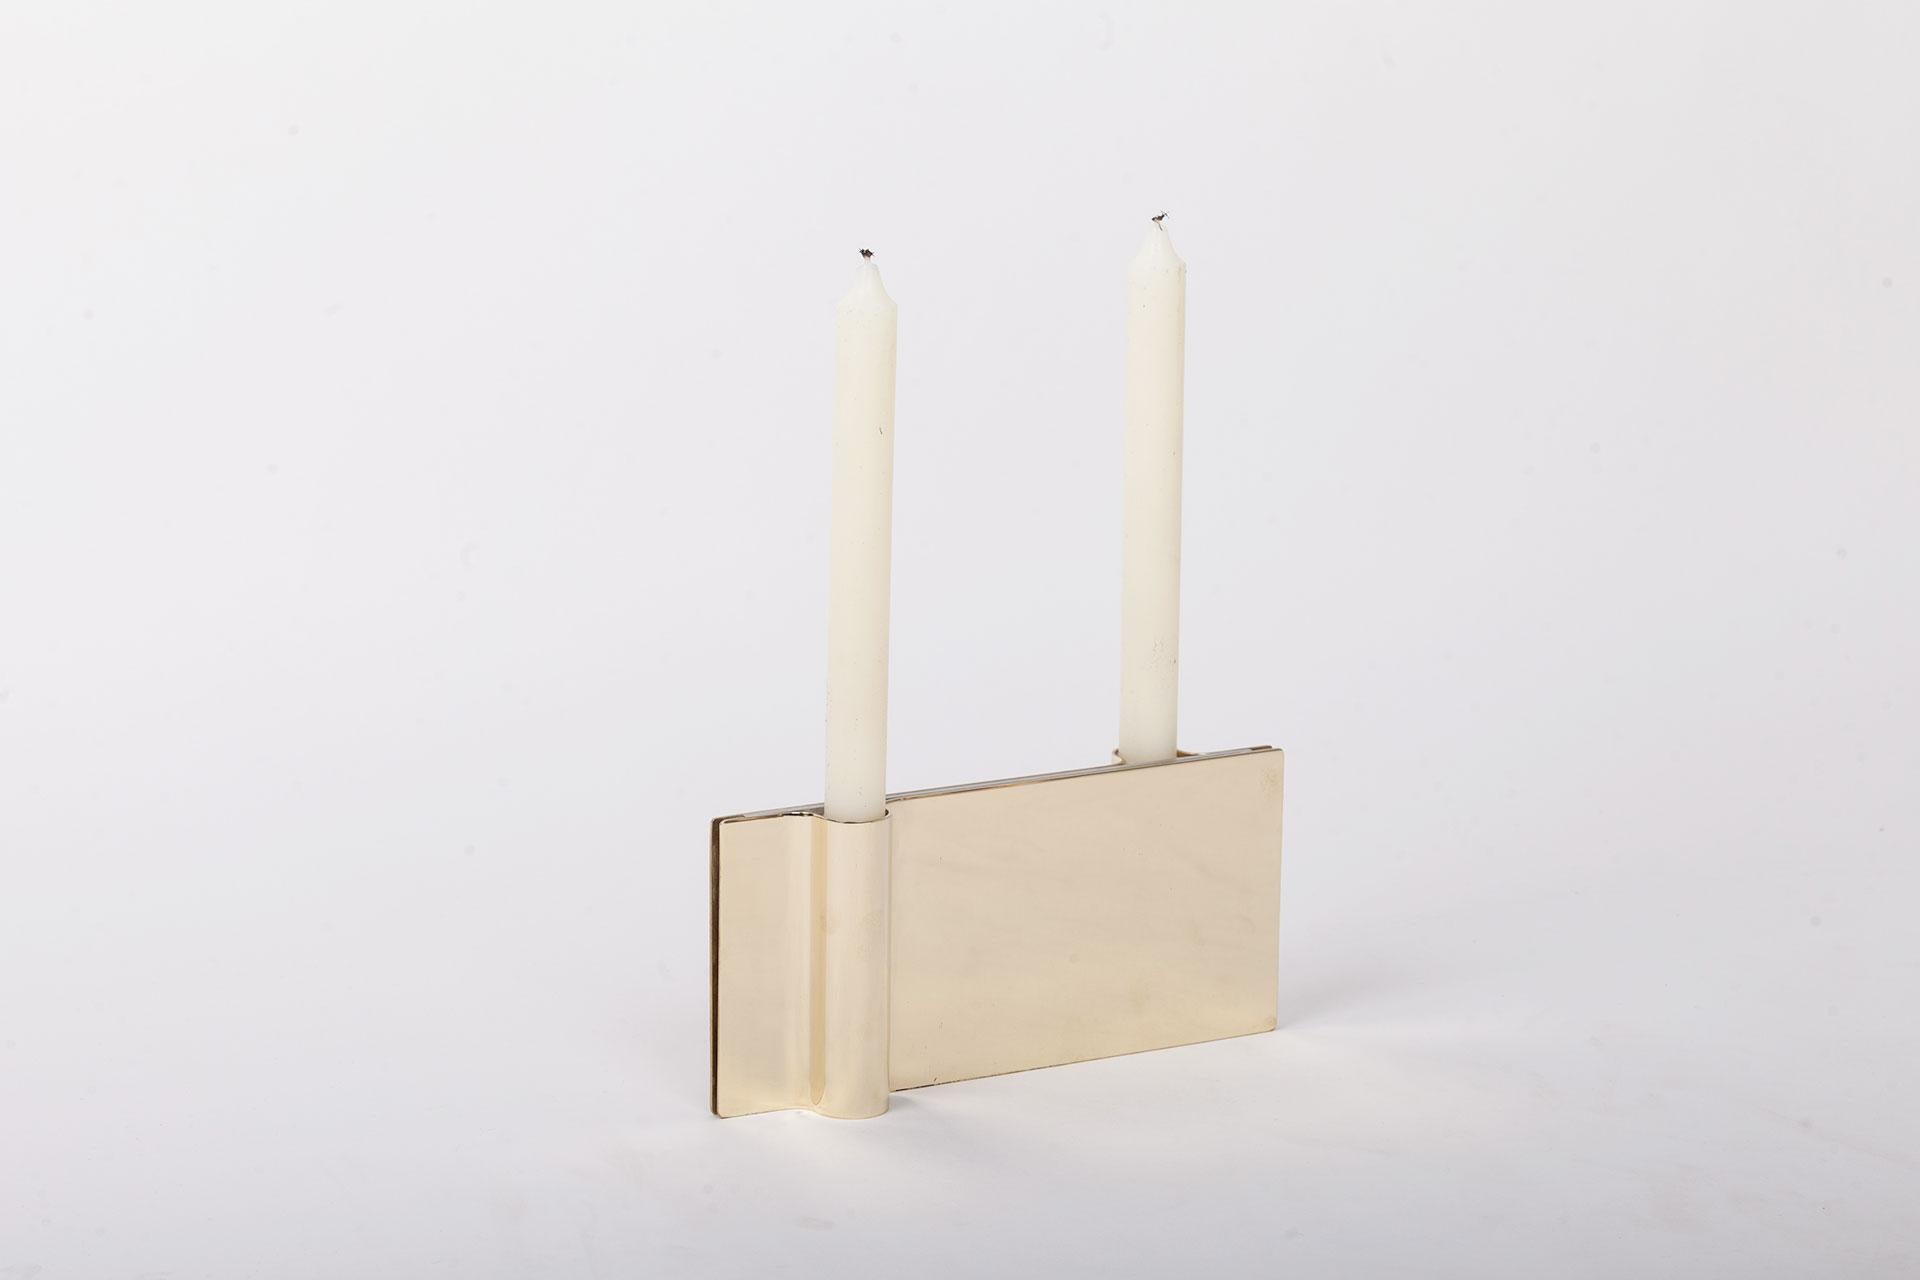 Folio brass candle holder by Mingardo
Dimensions: D22.5 x W2.2 x H11 cm 
Materials: polished natural brass
Weight: 1.5 kg

Also available in Different finishes: Polished natural copper, Polished natural brass, Polished natural stainless